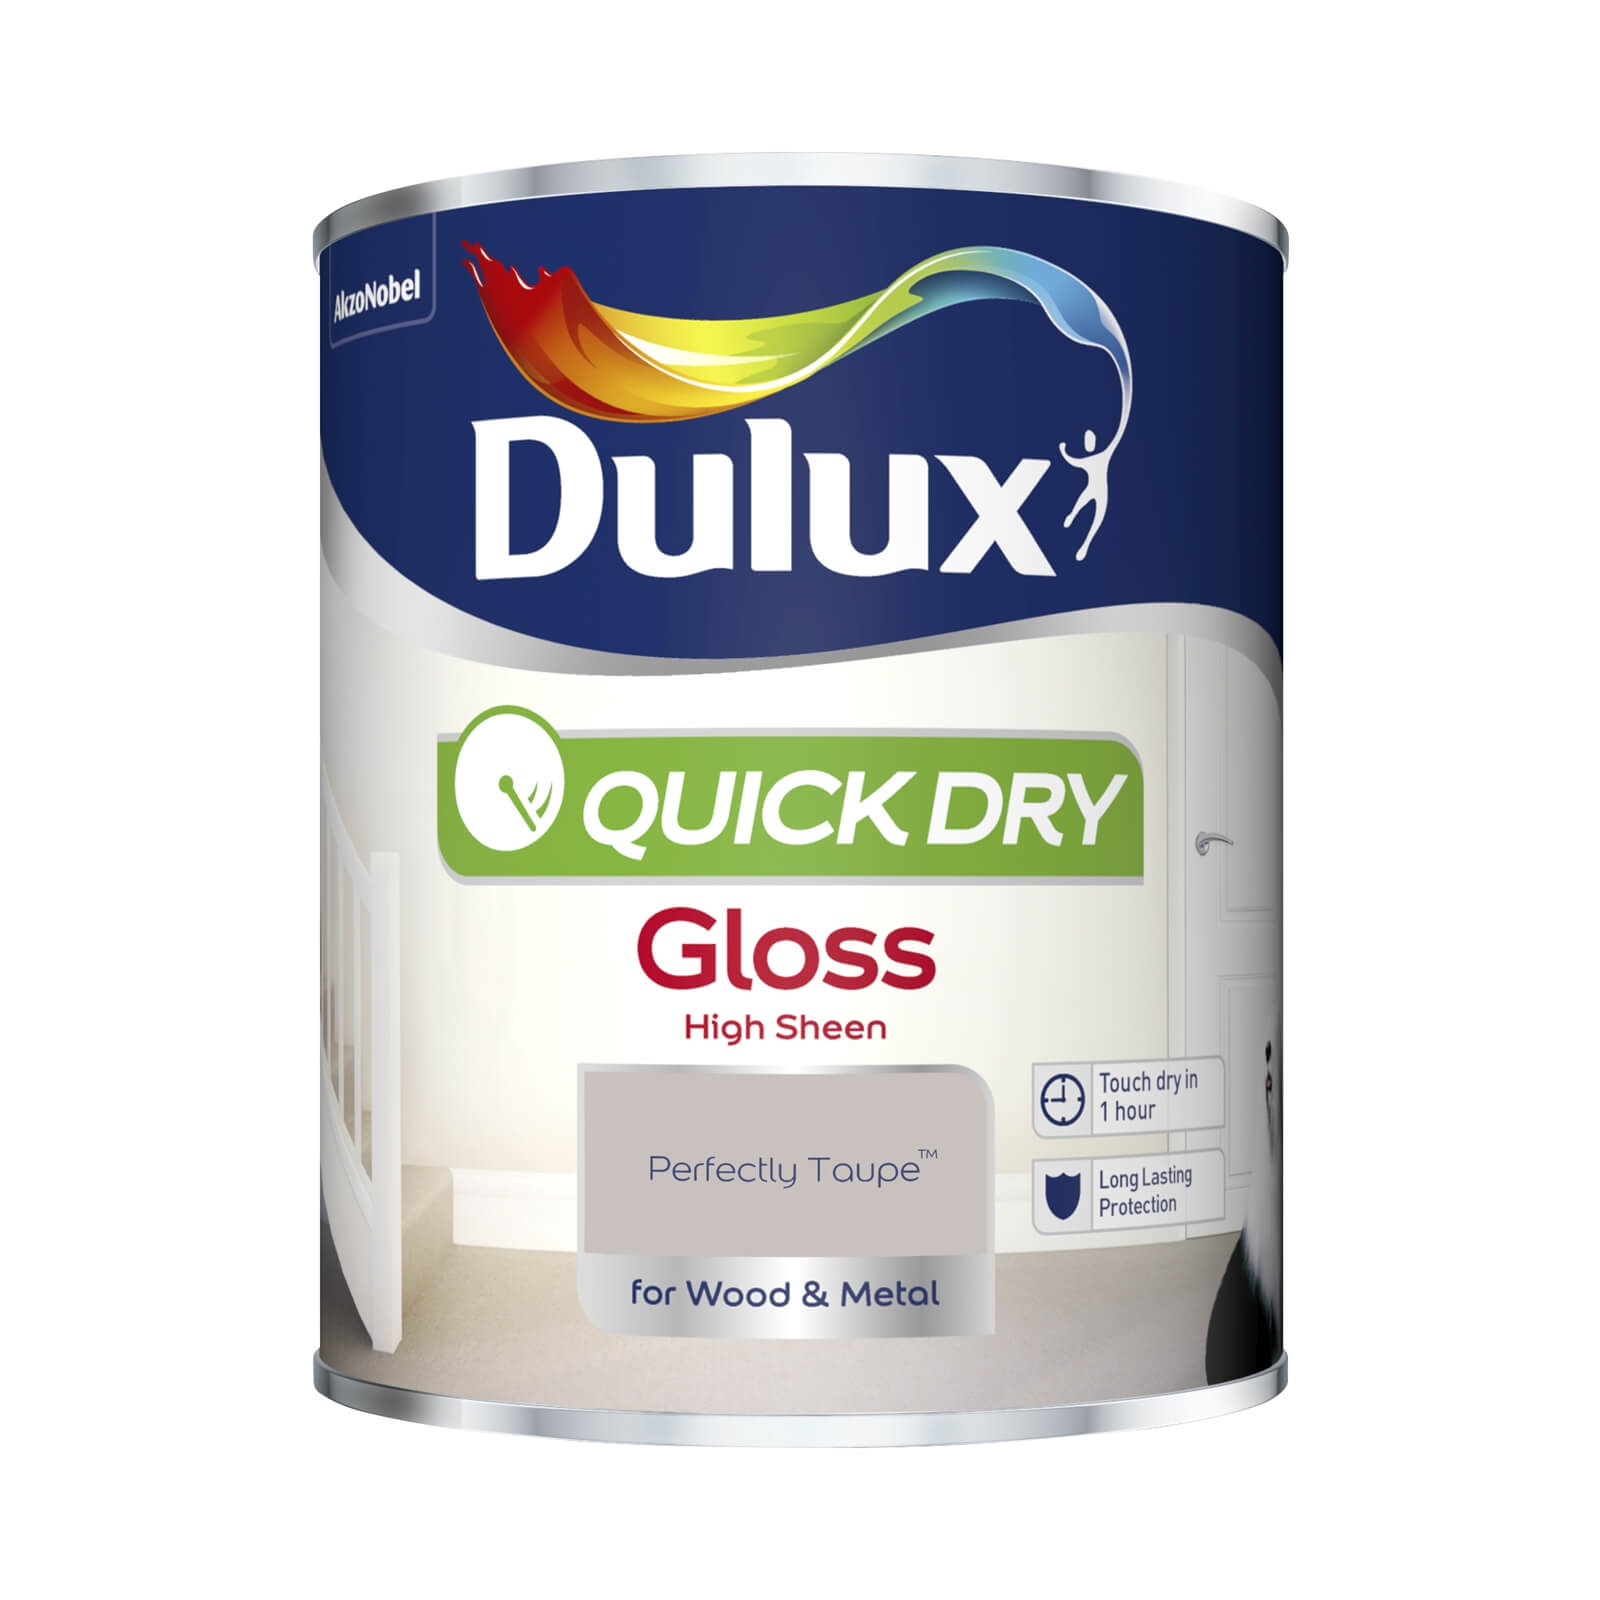 Dulux Quick Dry Gloss Paint Perfectly Taupe - 750ml